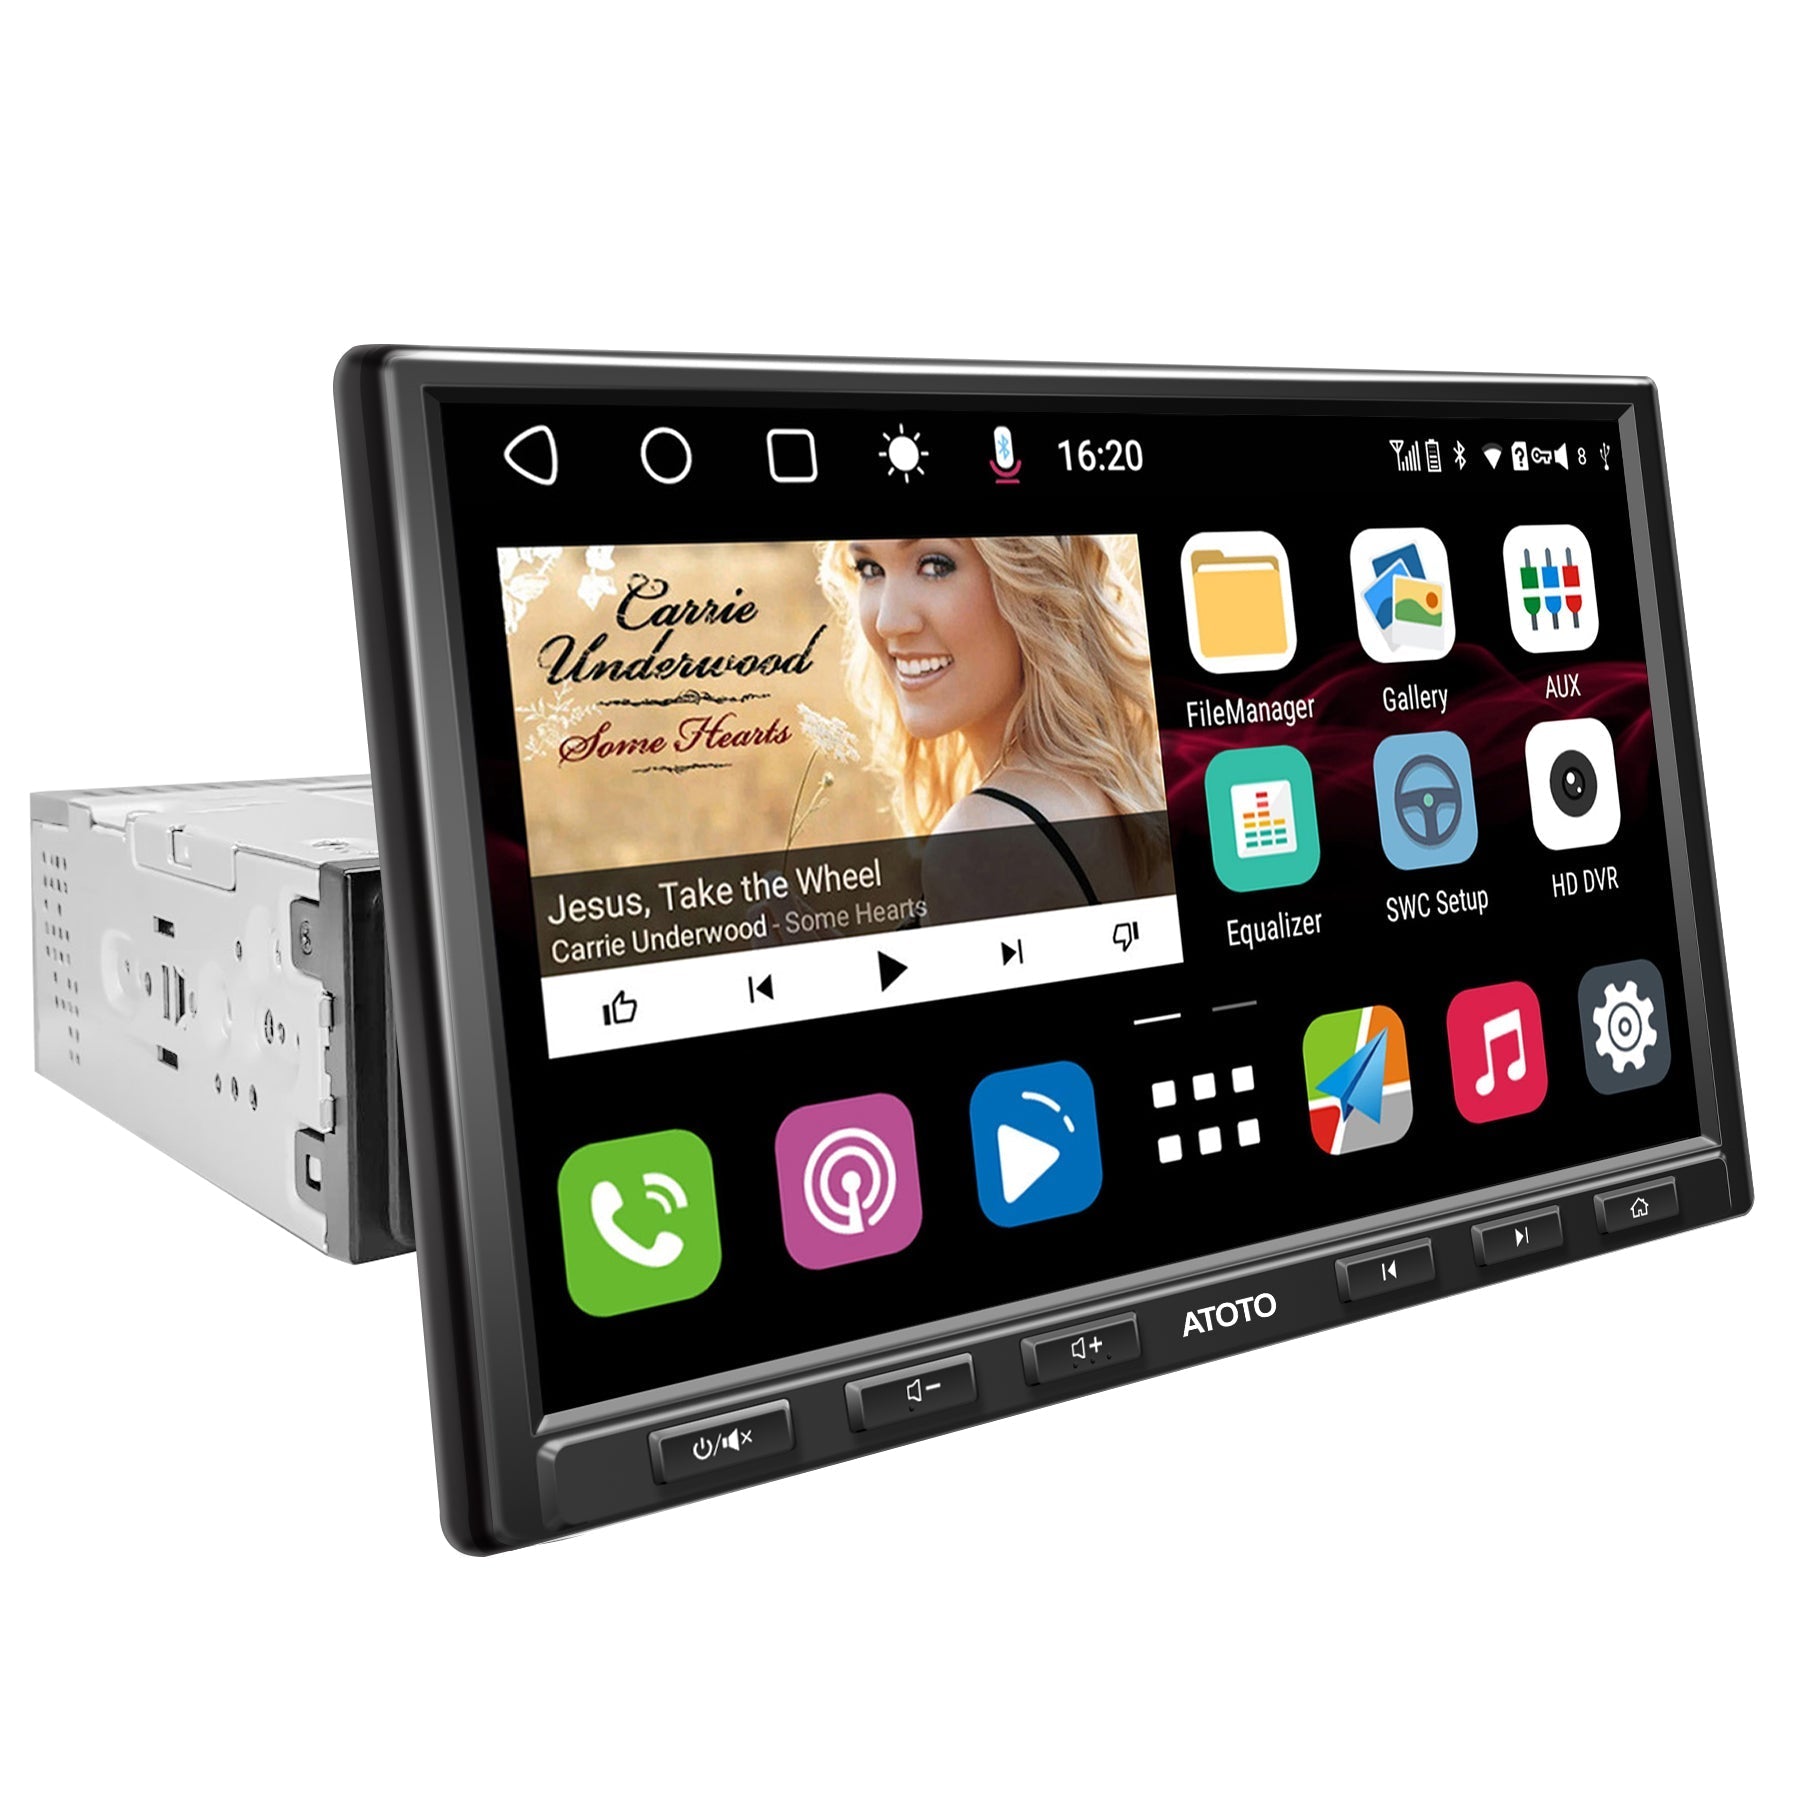 Onlinecar Stereoatoto S8 Carplay Android Auto Stereo - 10 Inch Double-din  Touch Screen, Universal Fit, 32gb Rom, Built-in Gps, Steering Control